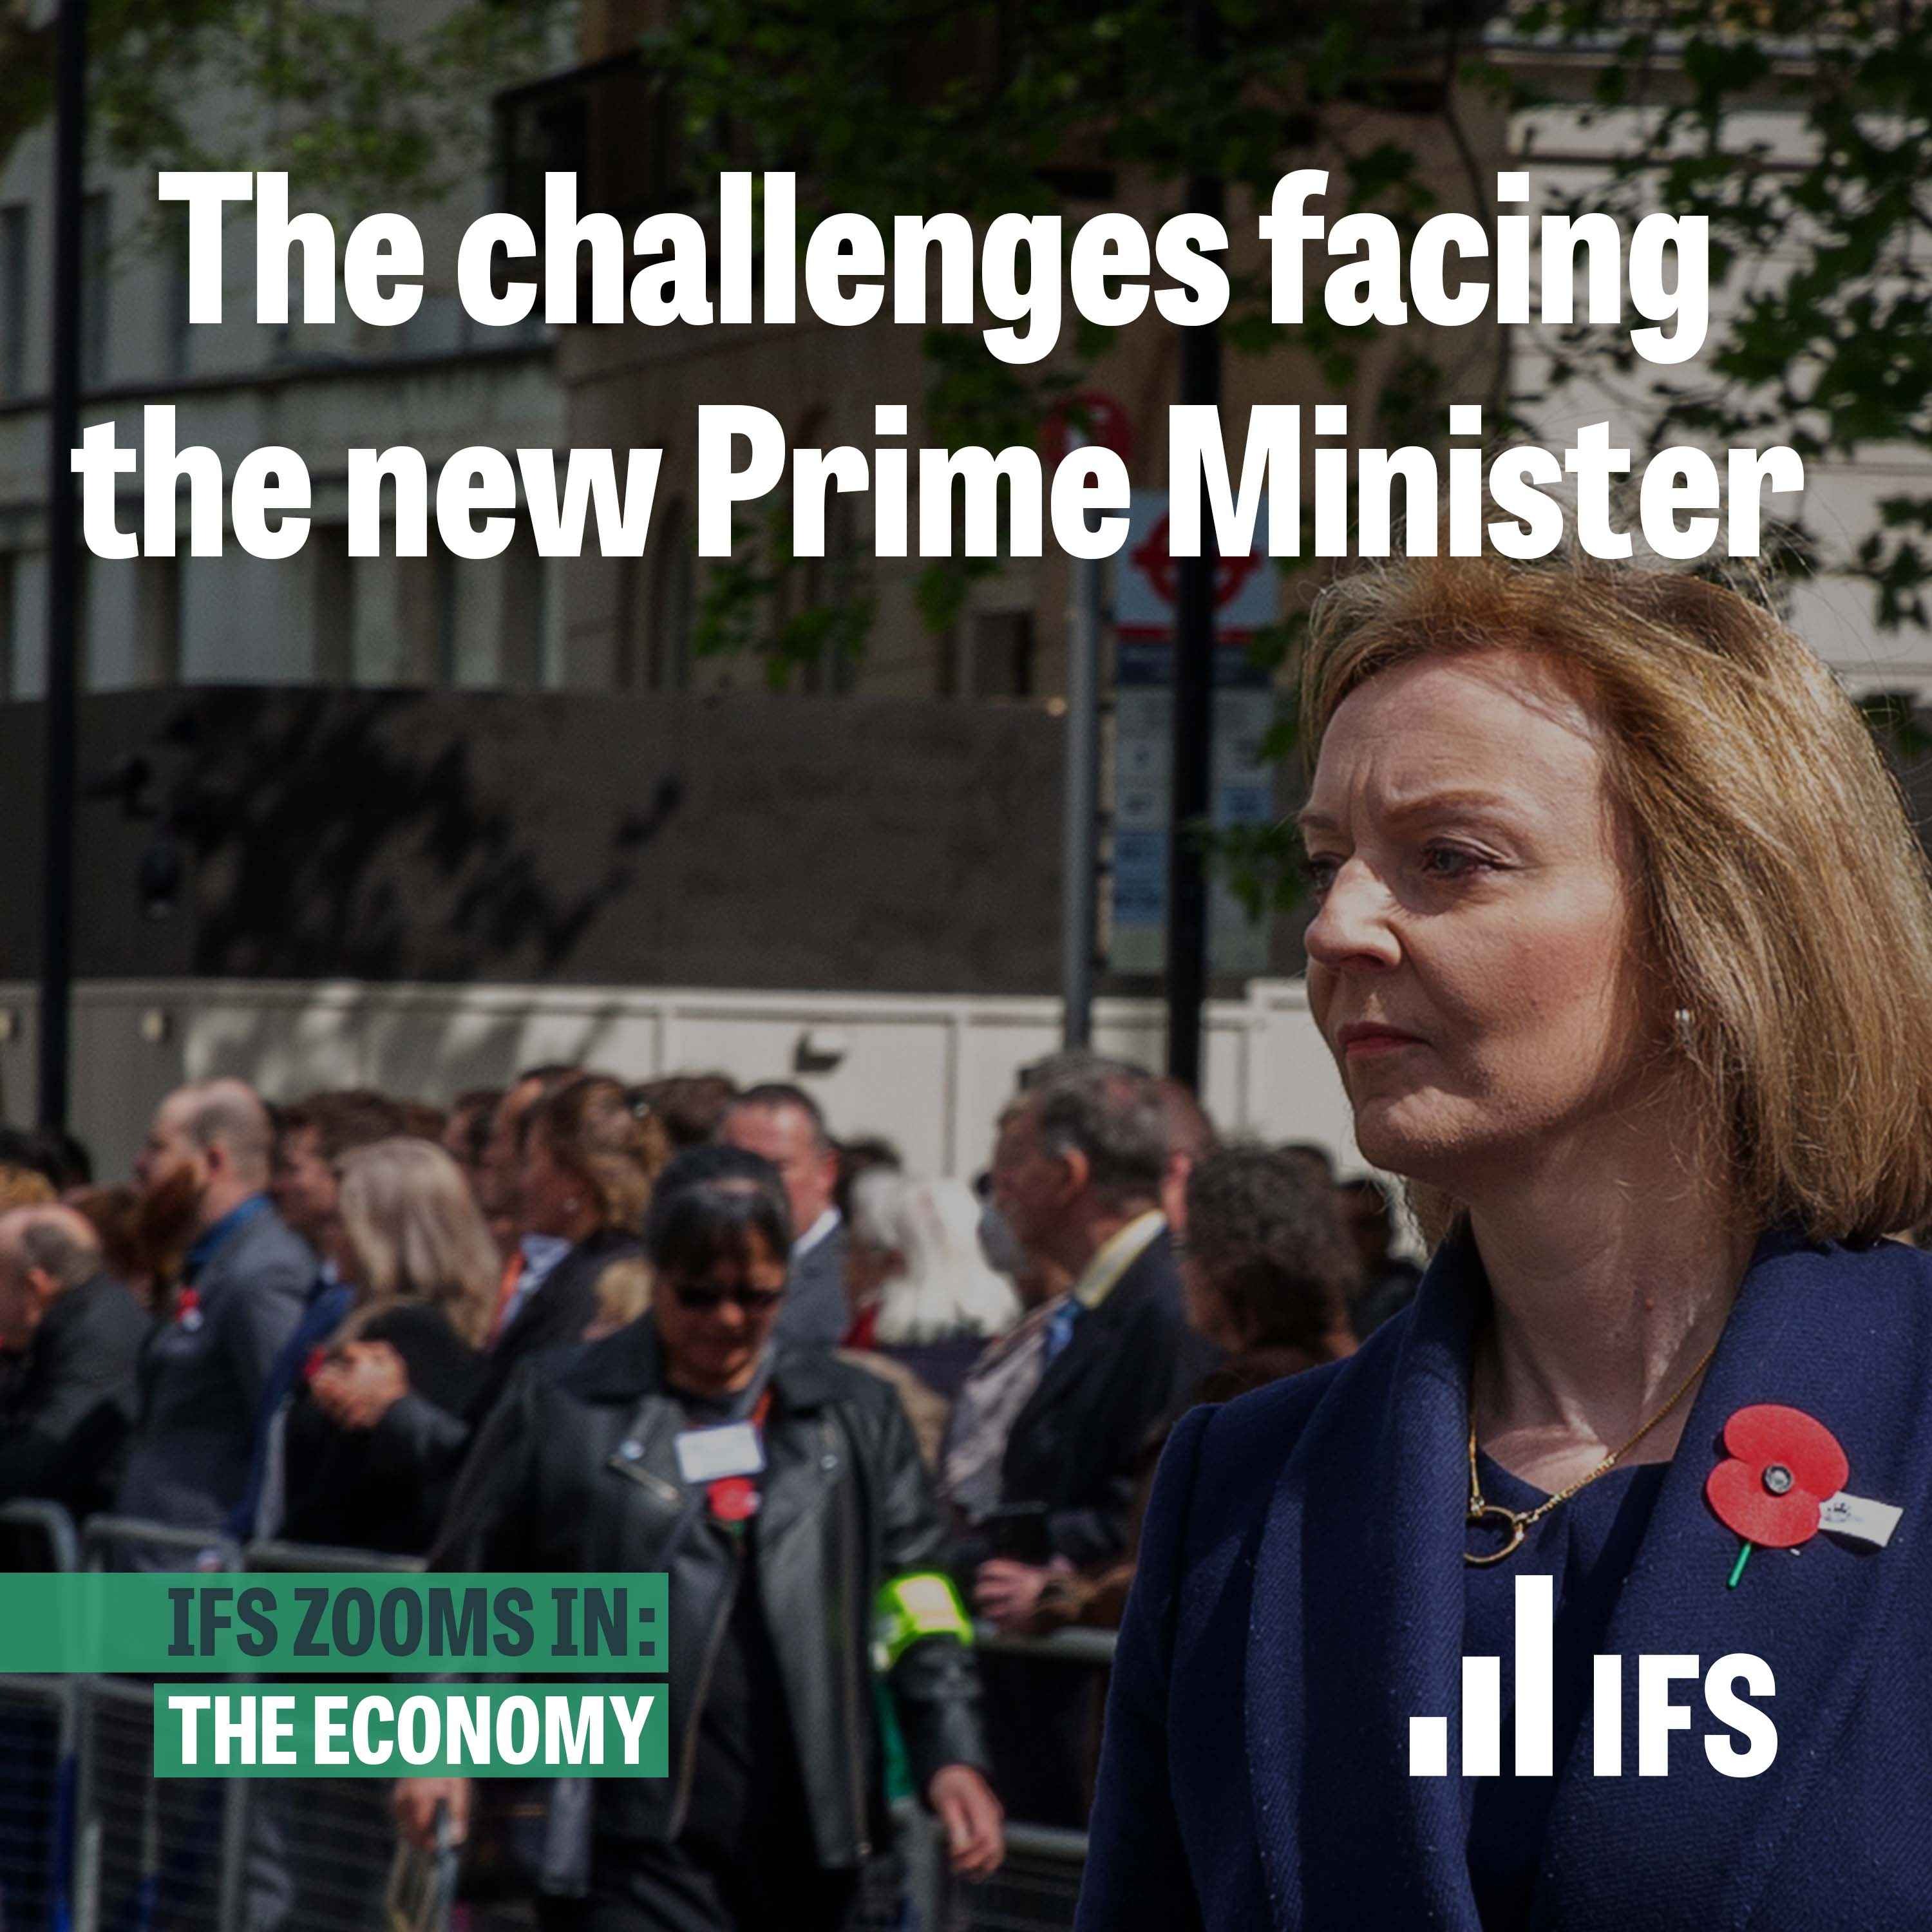 The challenges facing the new Prime Minister